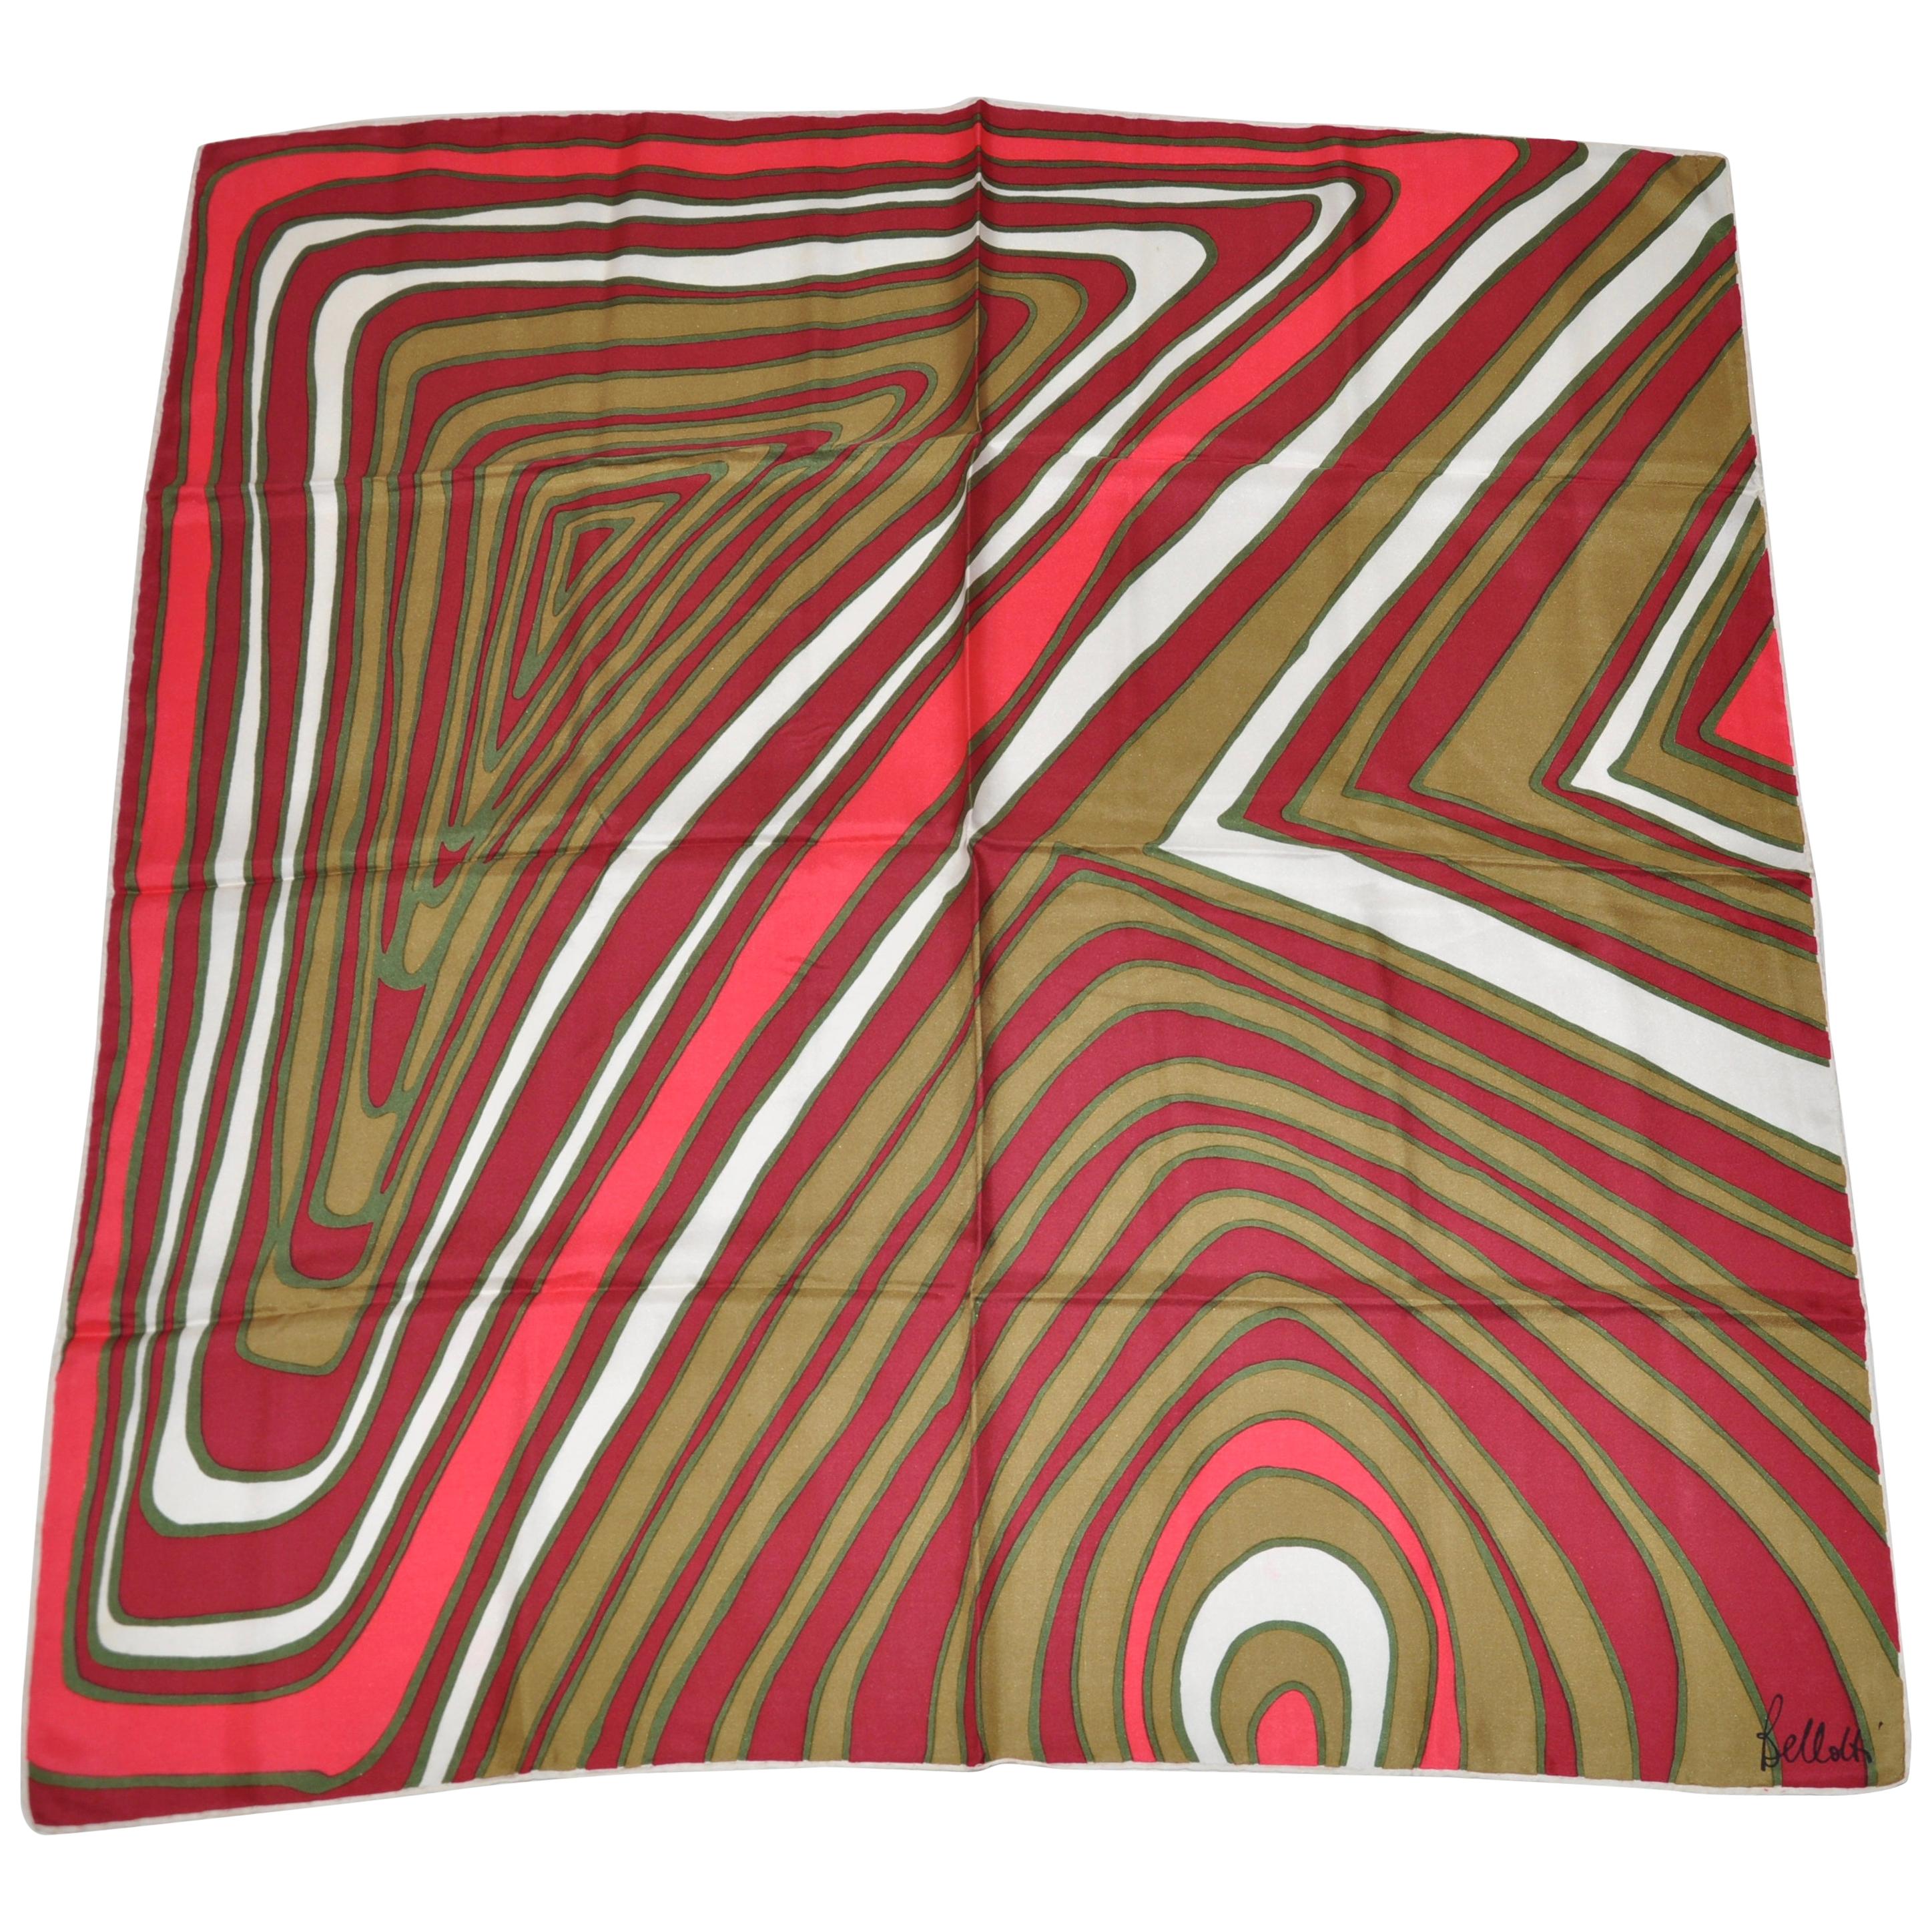 Bellolti Whimsically White Borders "Candy Cane Dream" Silk Scarf